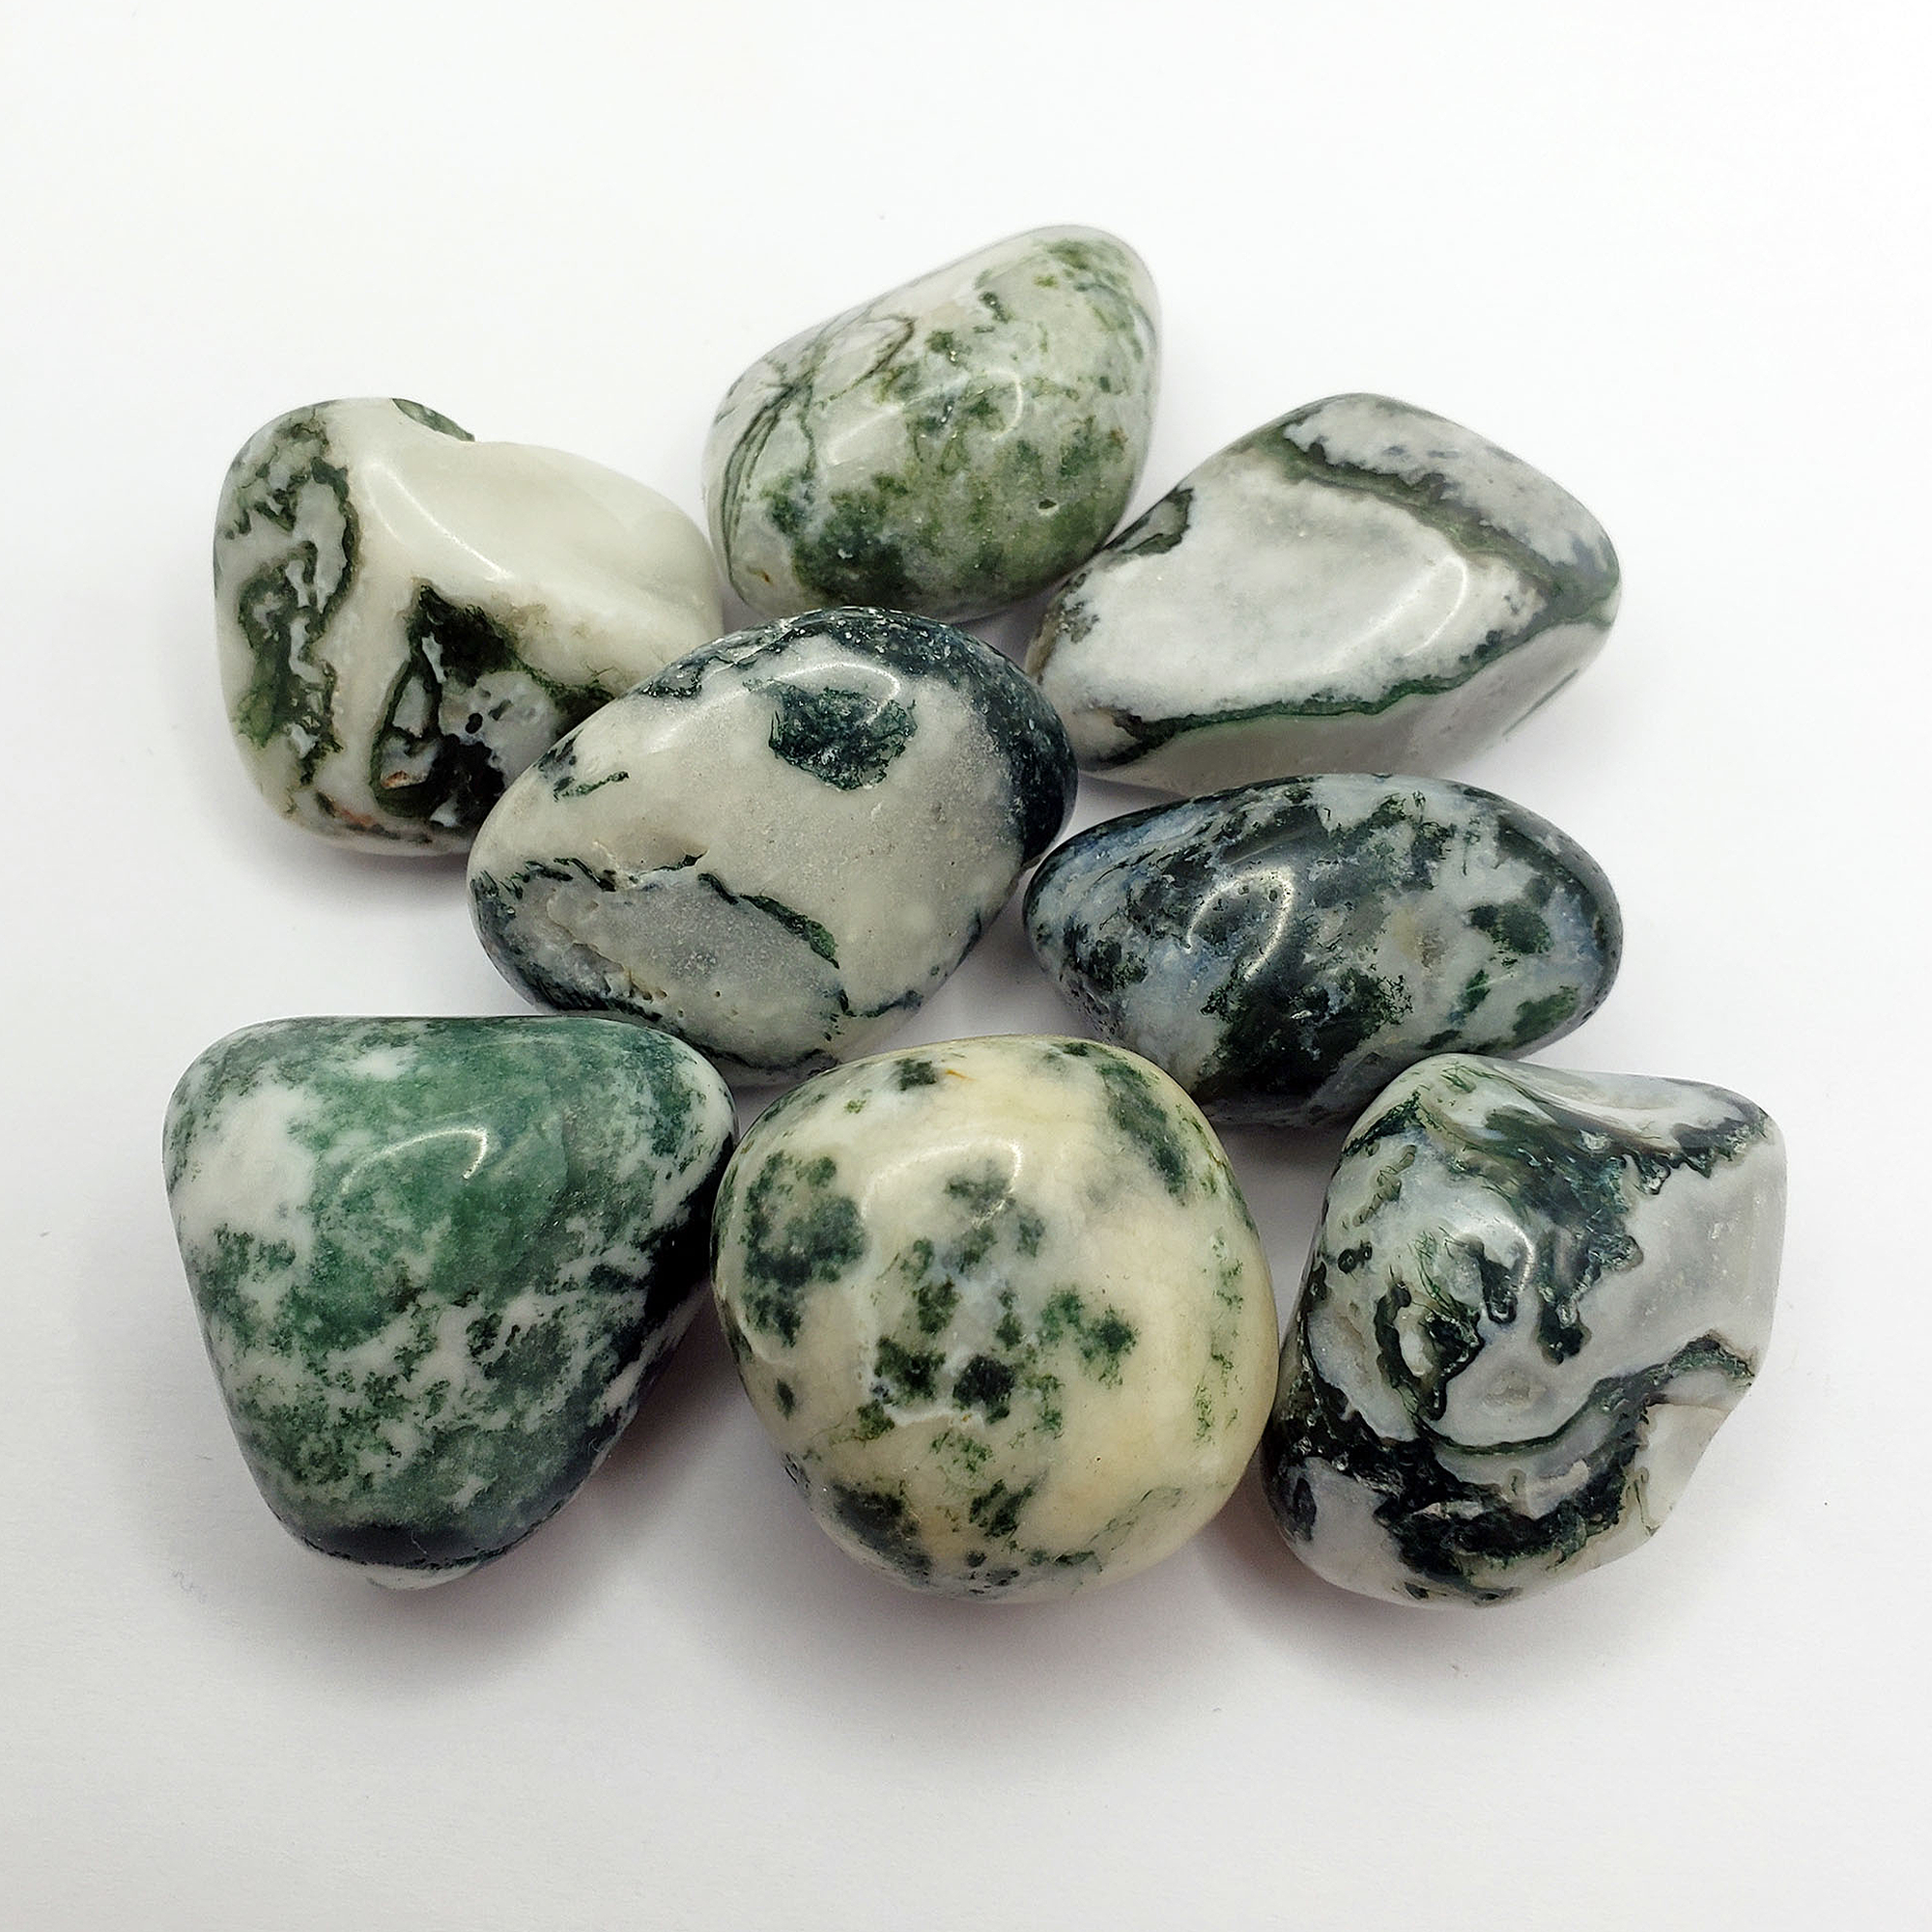 Tree Agate Natural Tumbled Crystal - One Stone - White Background Close Up